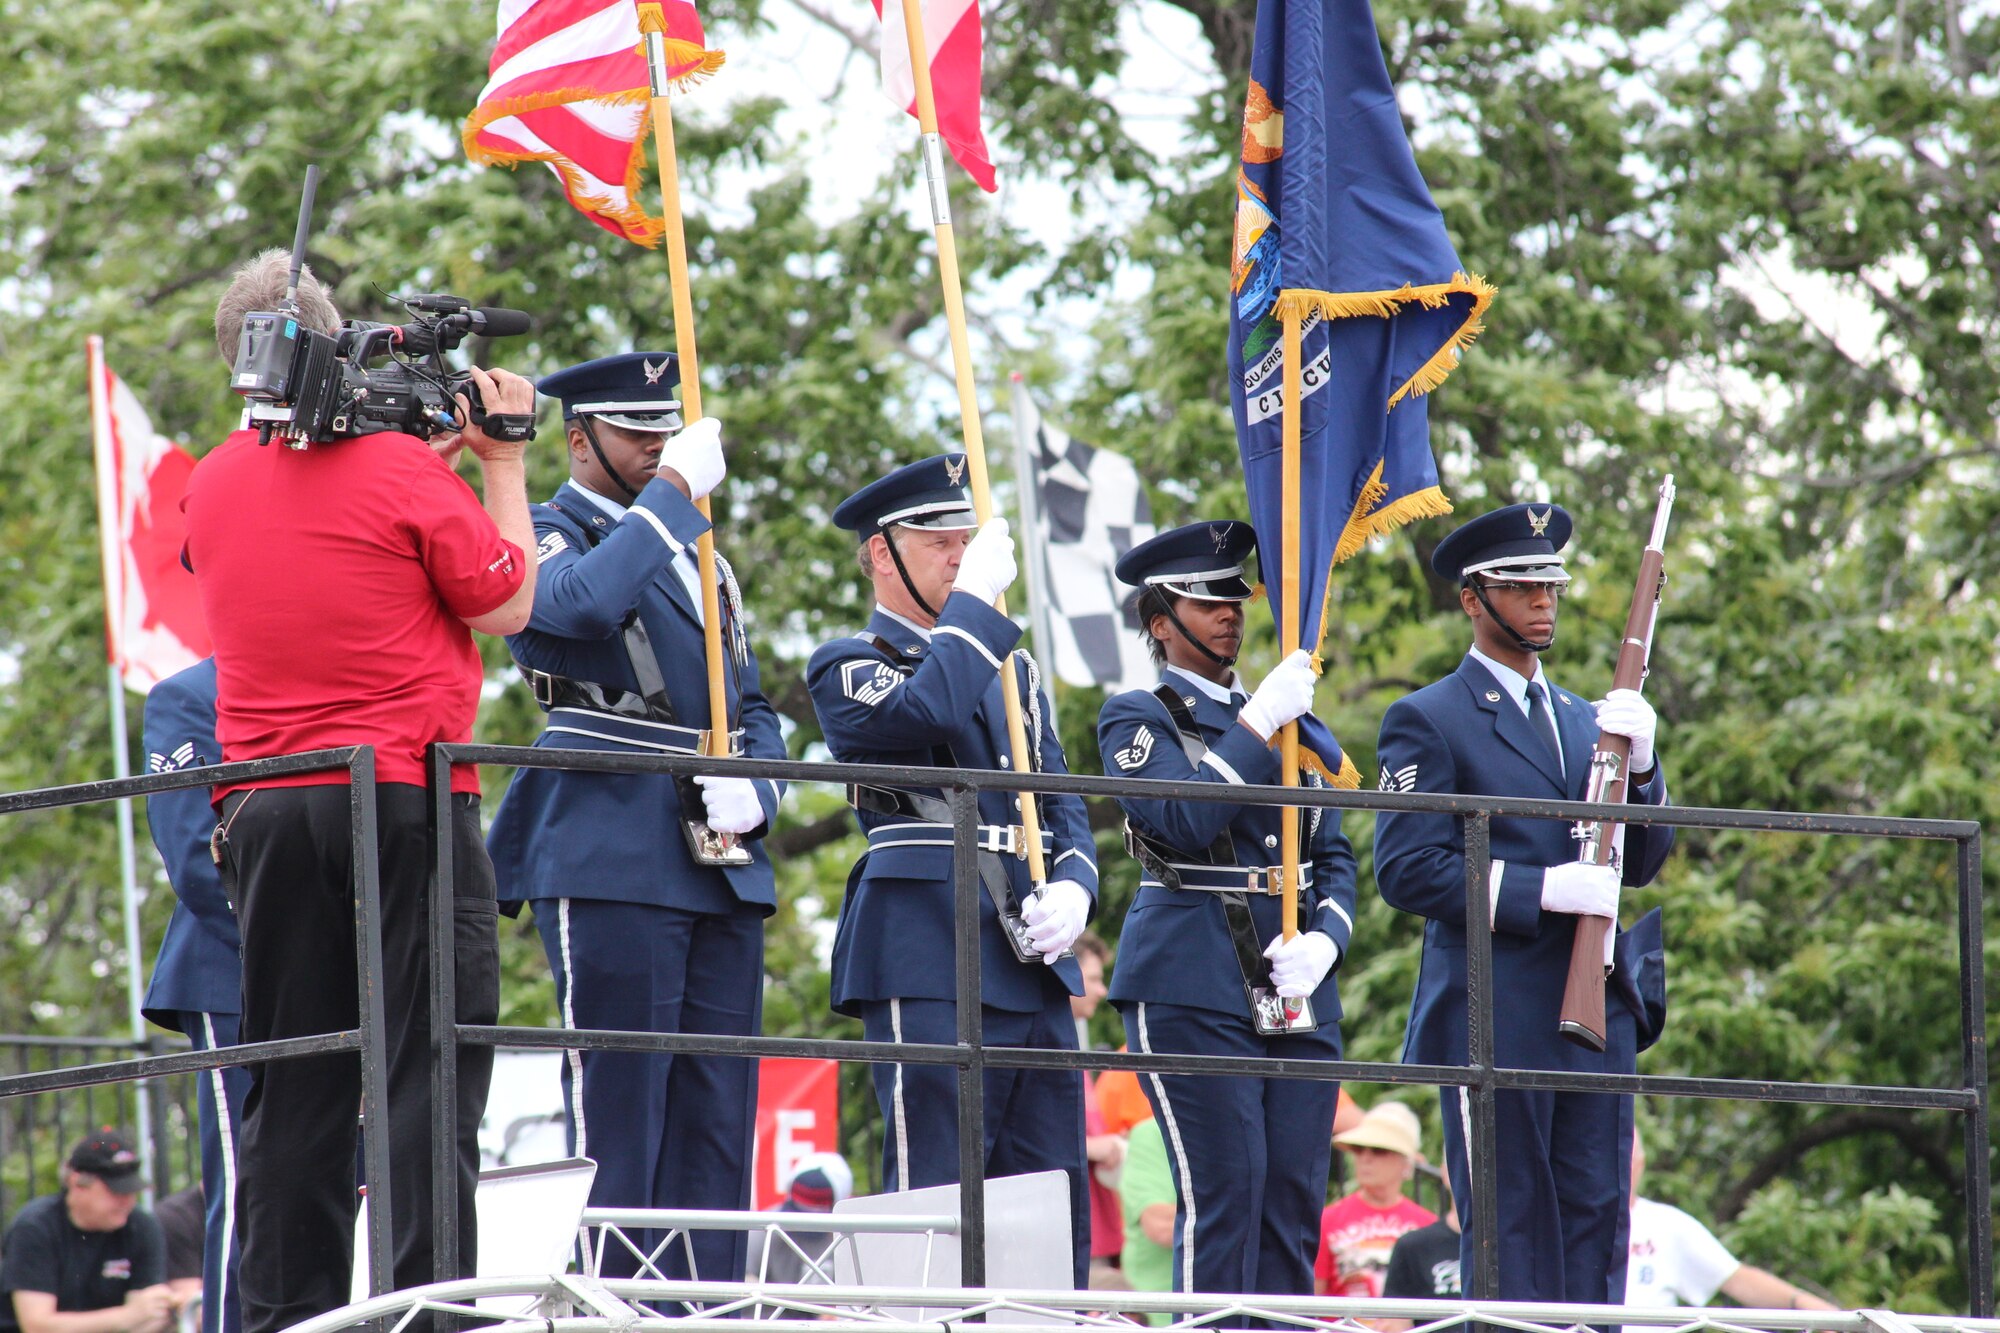 130601-Z-NV943-085: Members of the Selfridge Air National Guard Base, Mich., Honor Guard stand ready to present the colors prior to the start of a race on June 1, 2013, during the 2013 Chevrolet Detroit Belle Isle Grand Prix. More than 50 military members from the various branches and units at Selfridge took part in five volunteer events over the race weekend. Grand Prix officials invited the military members to participate in the events to show their appreciation for their service. (U.S. Air National Guard photo by Angela Pope/Released)